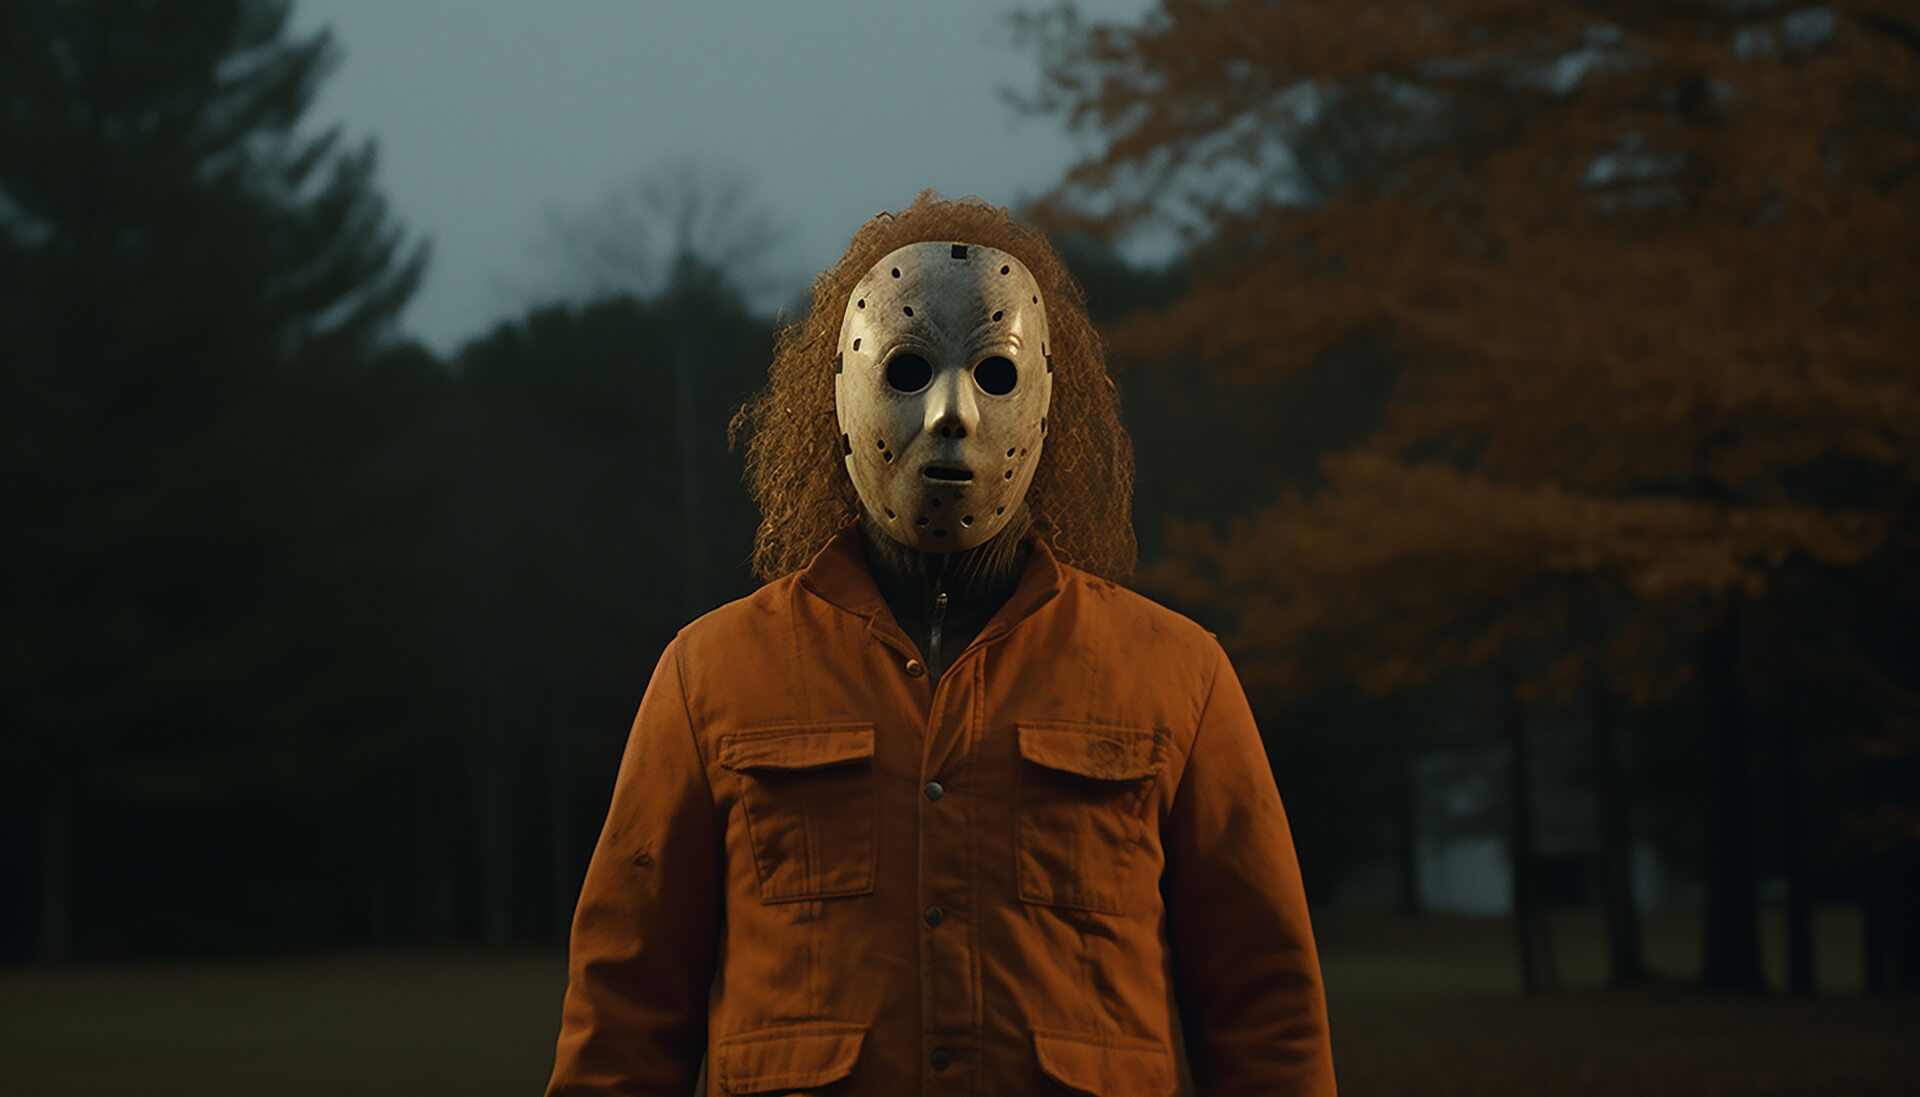 Uncover the terrifying tale of Jason Voorhees and his bloody journey in "Friday the 13th" – A must-see for horror fans.